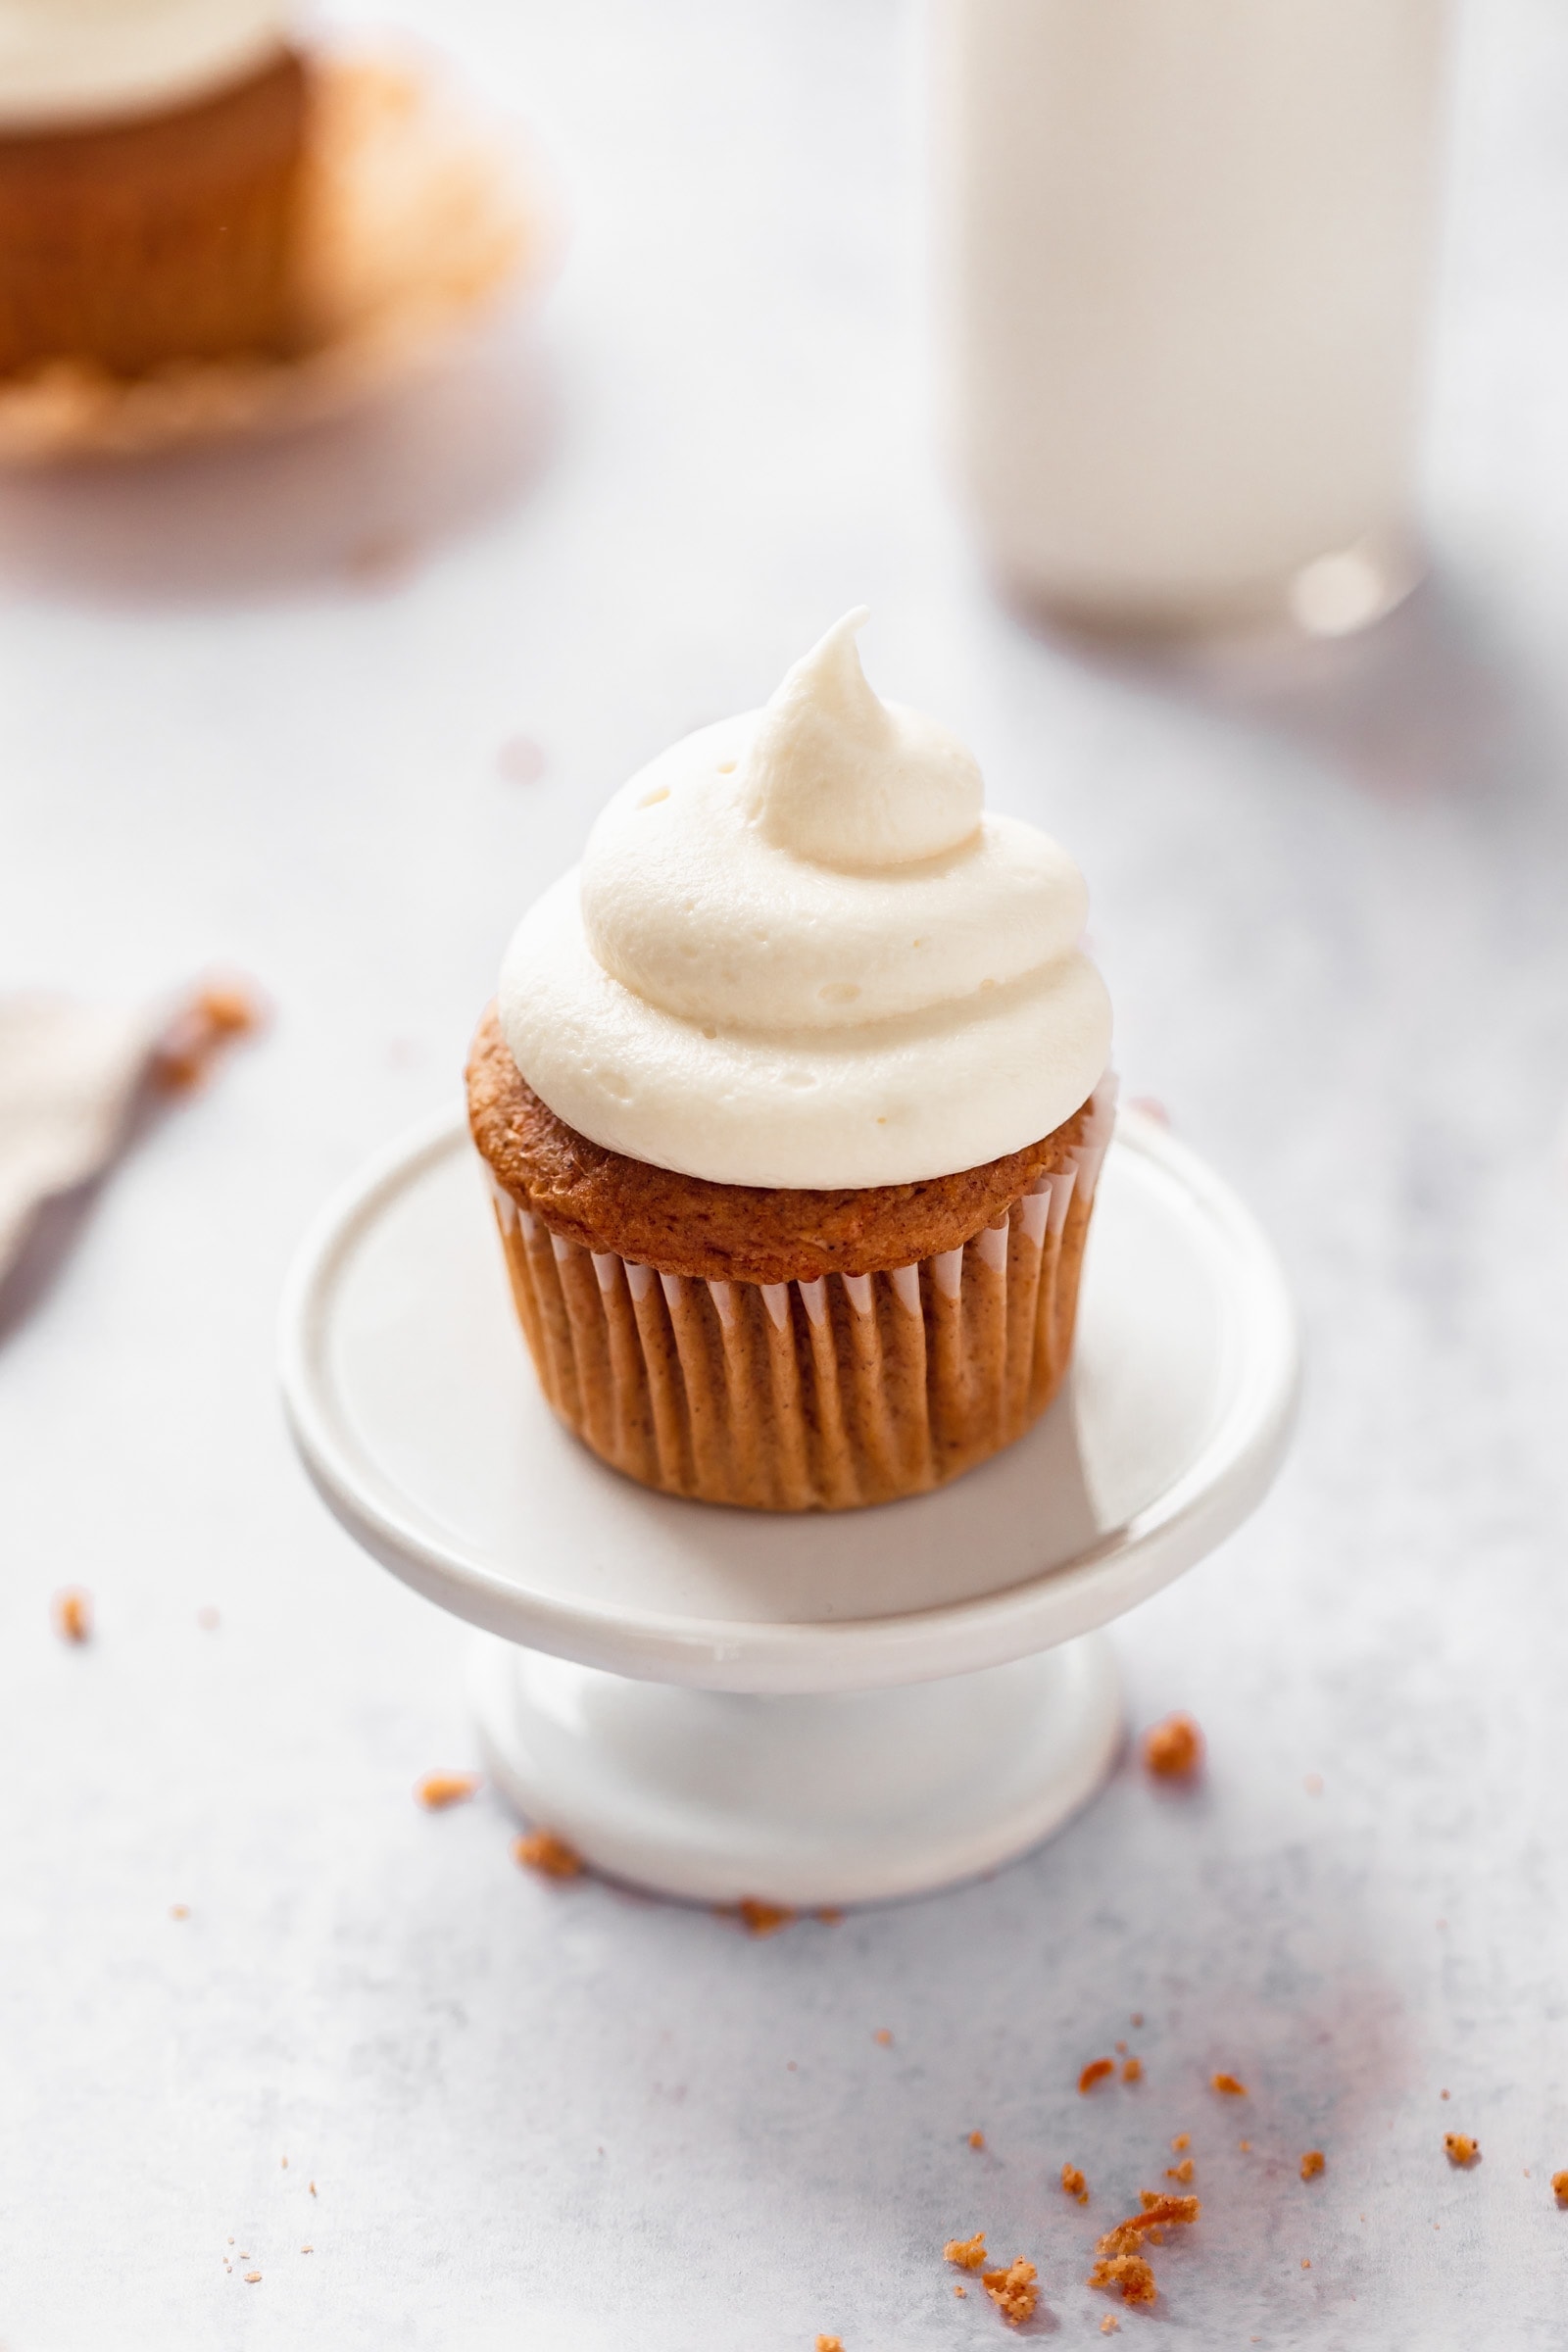 perfect fluffy cream cheese frosting piped on a carrot cake cupcake